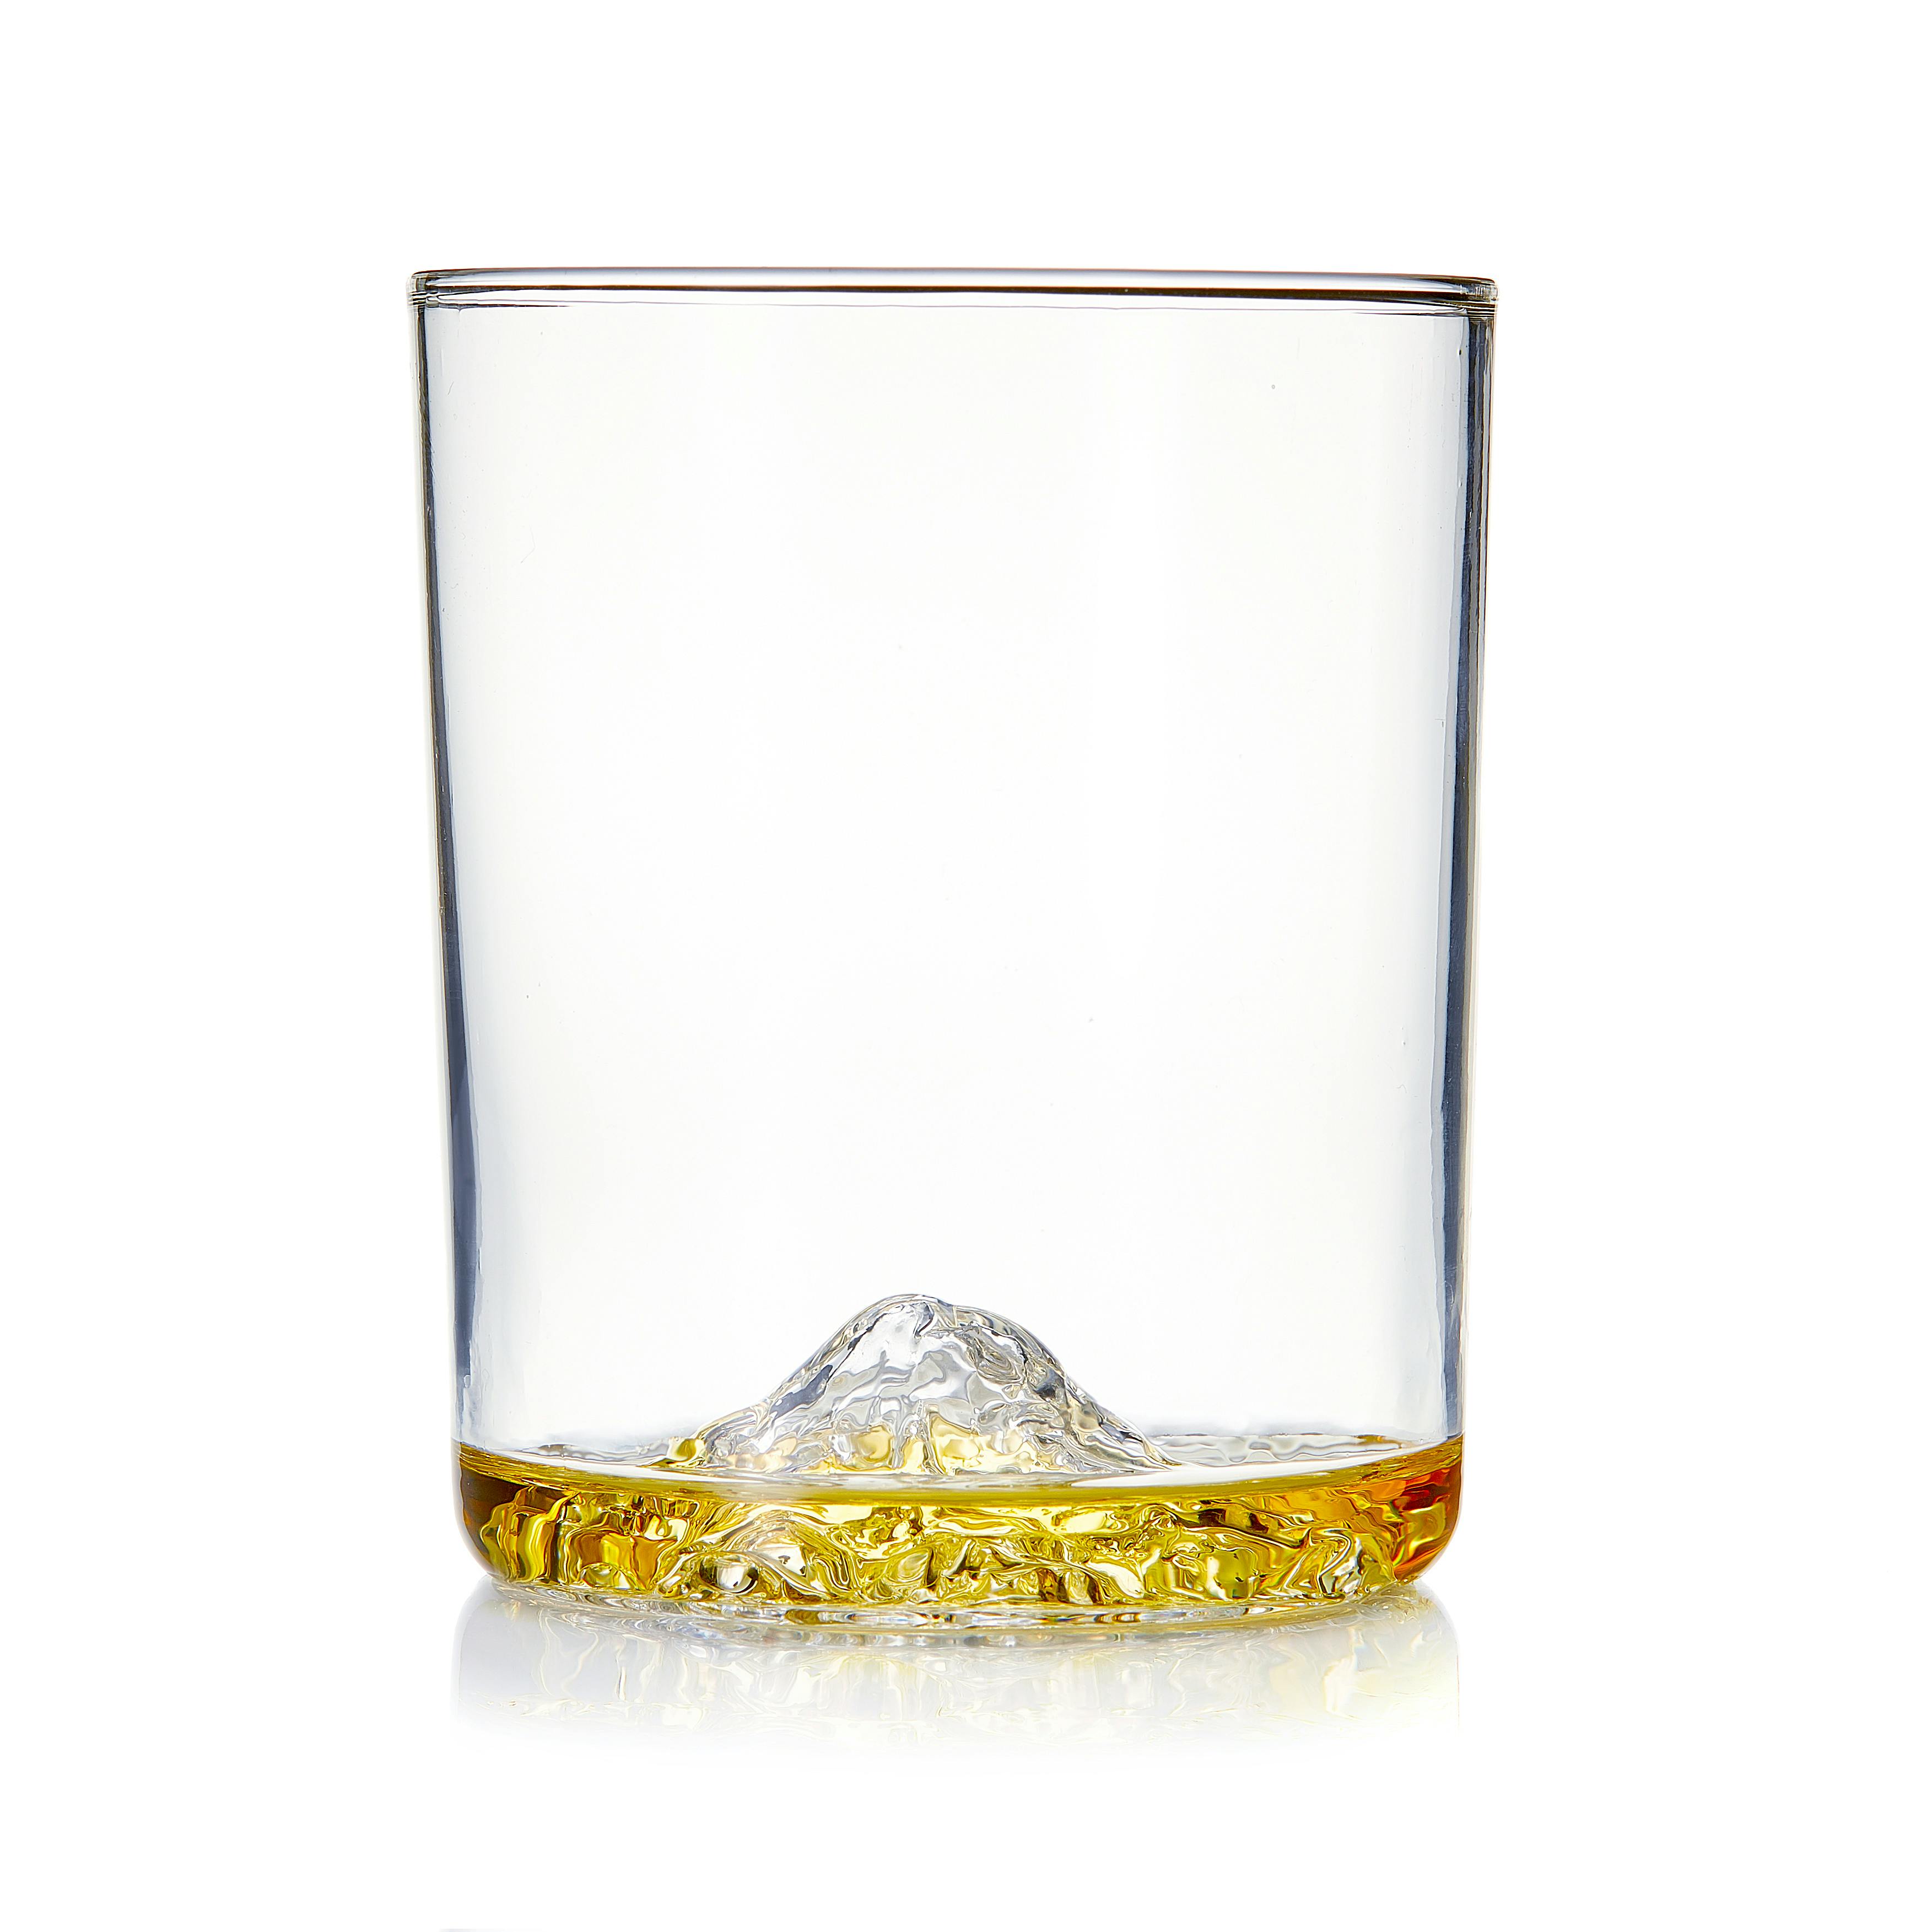 American Mountains - Set of 4 Whiskey Glasses